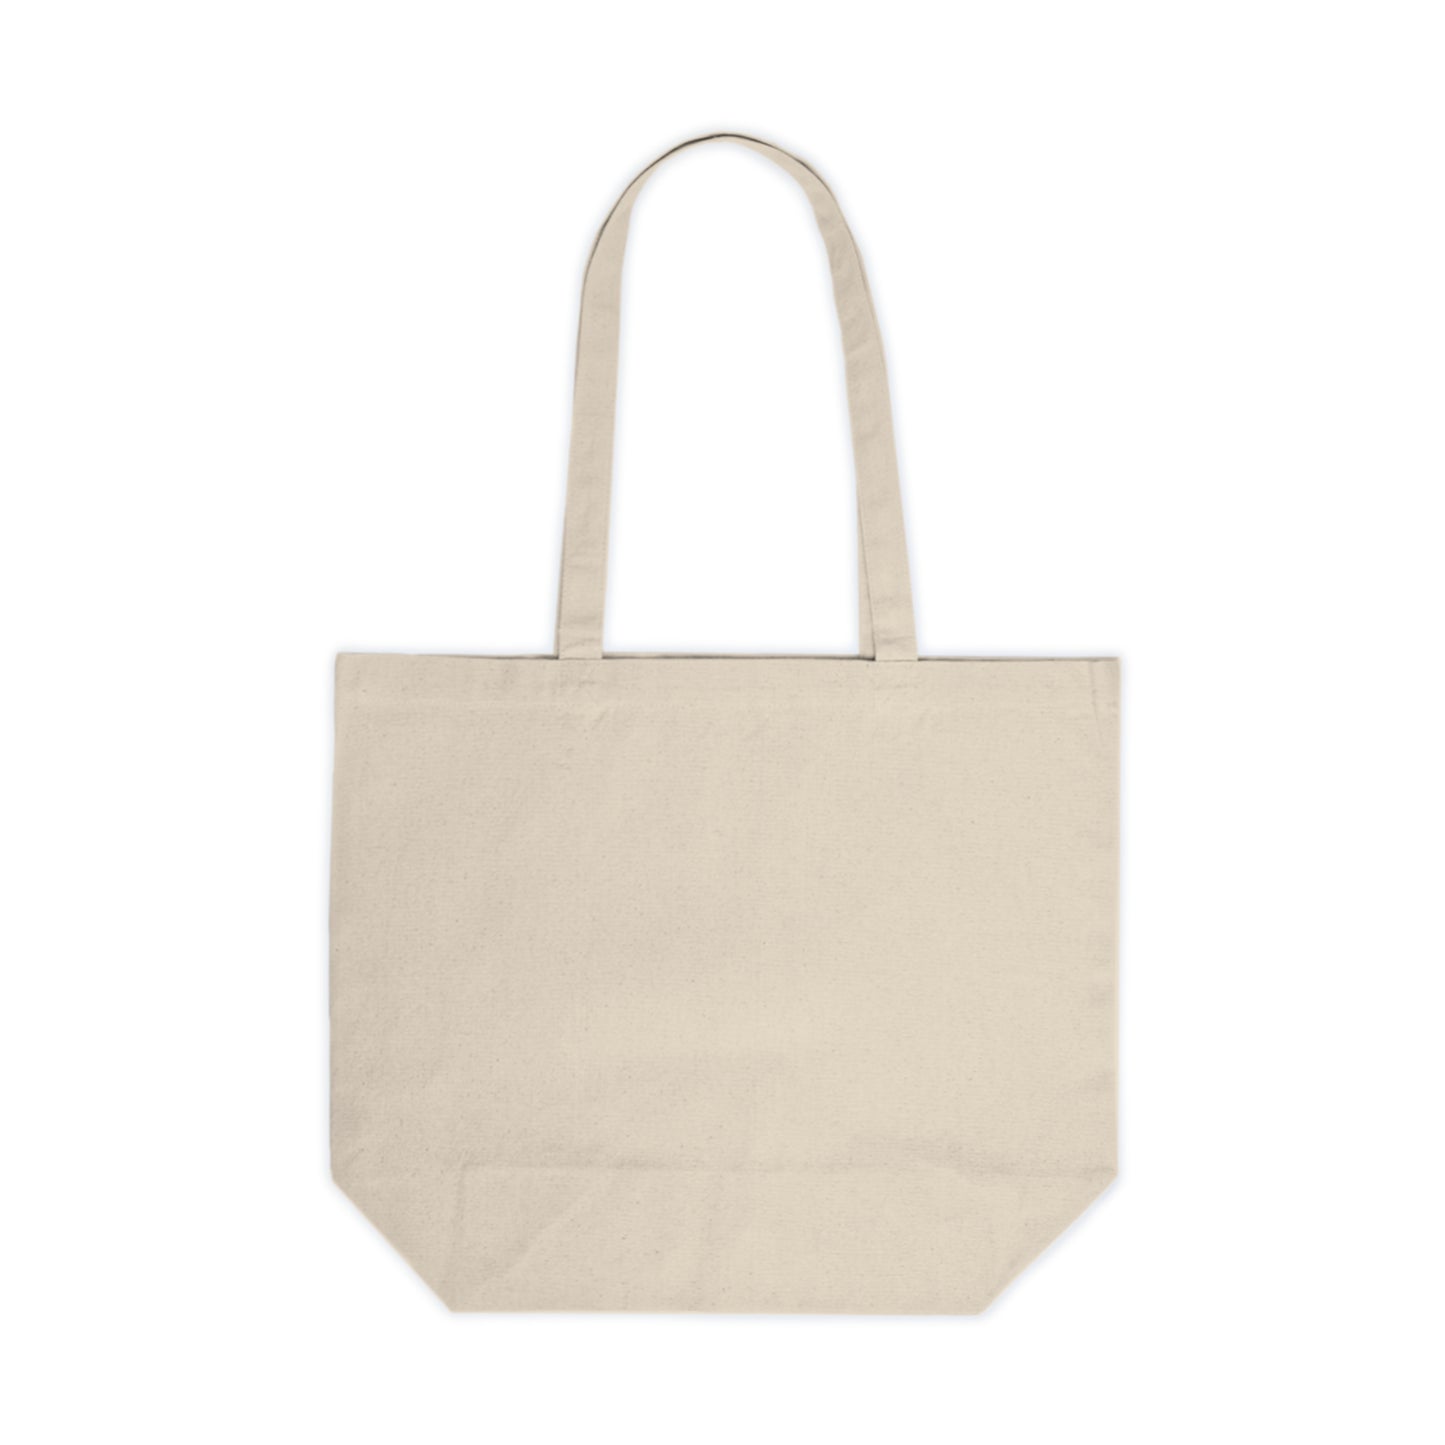 Library Canvas Tote